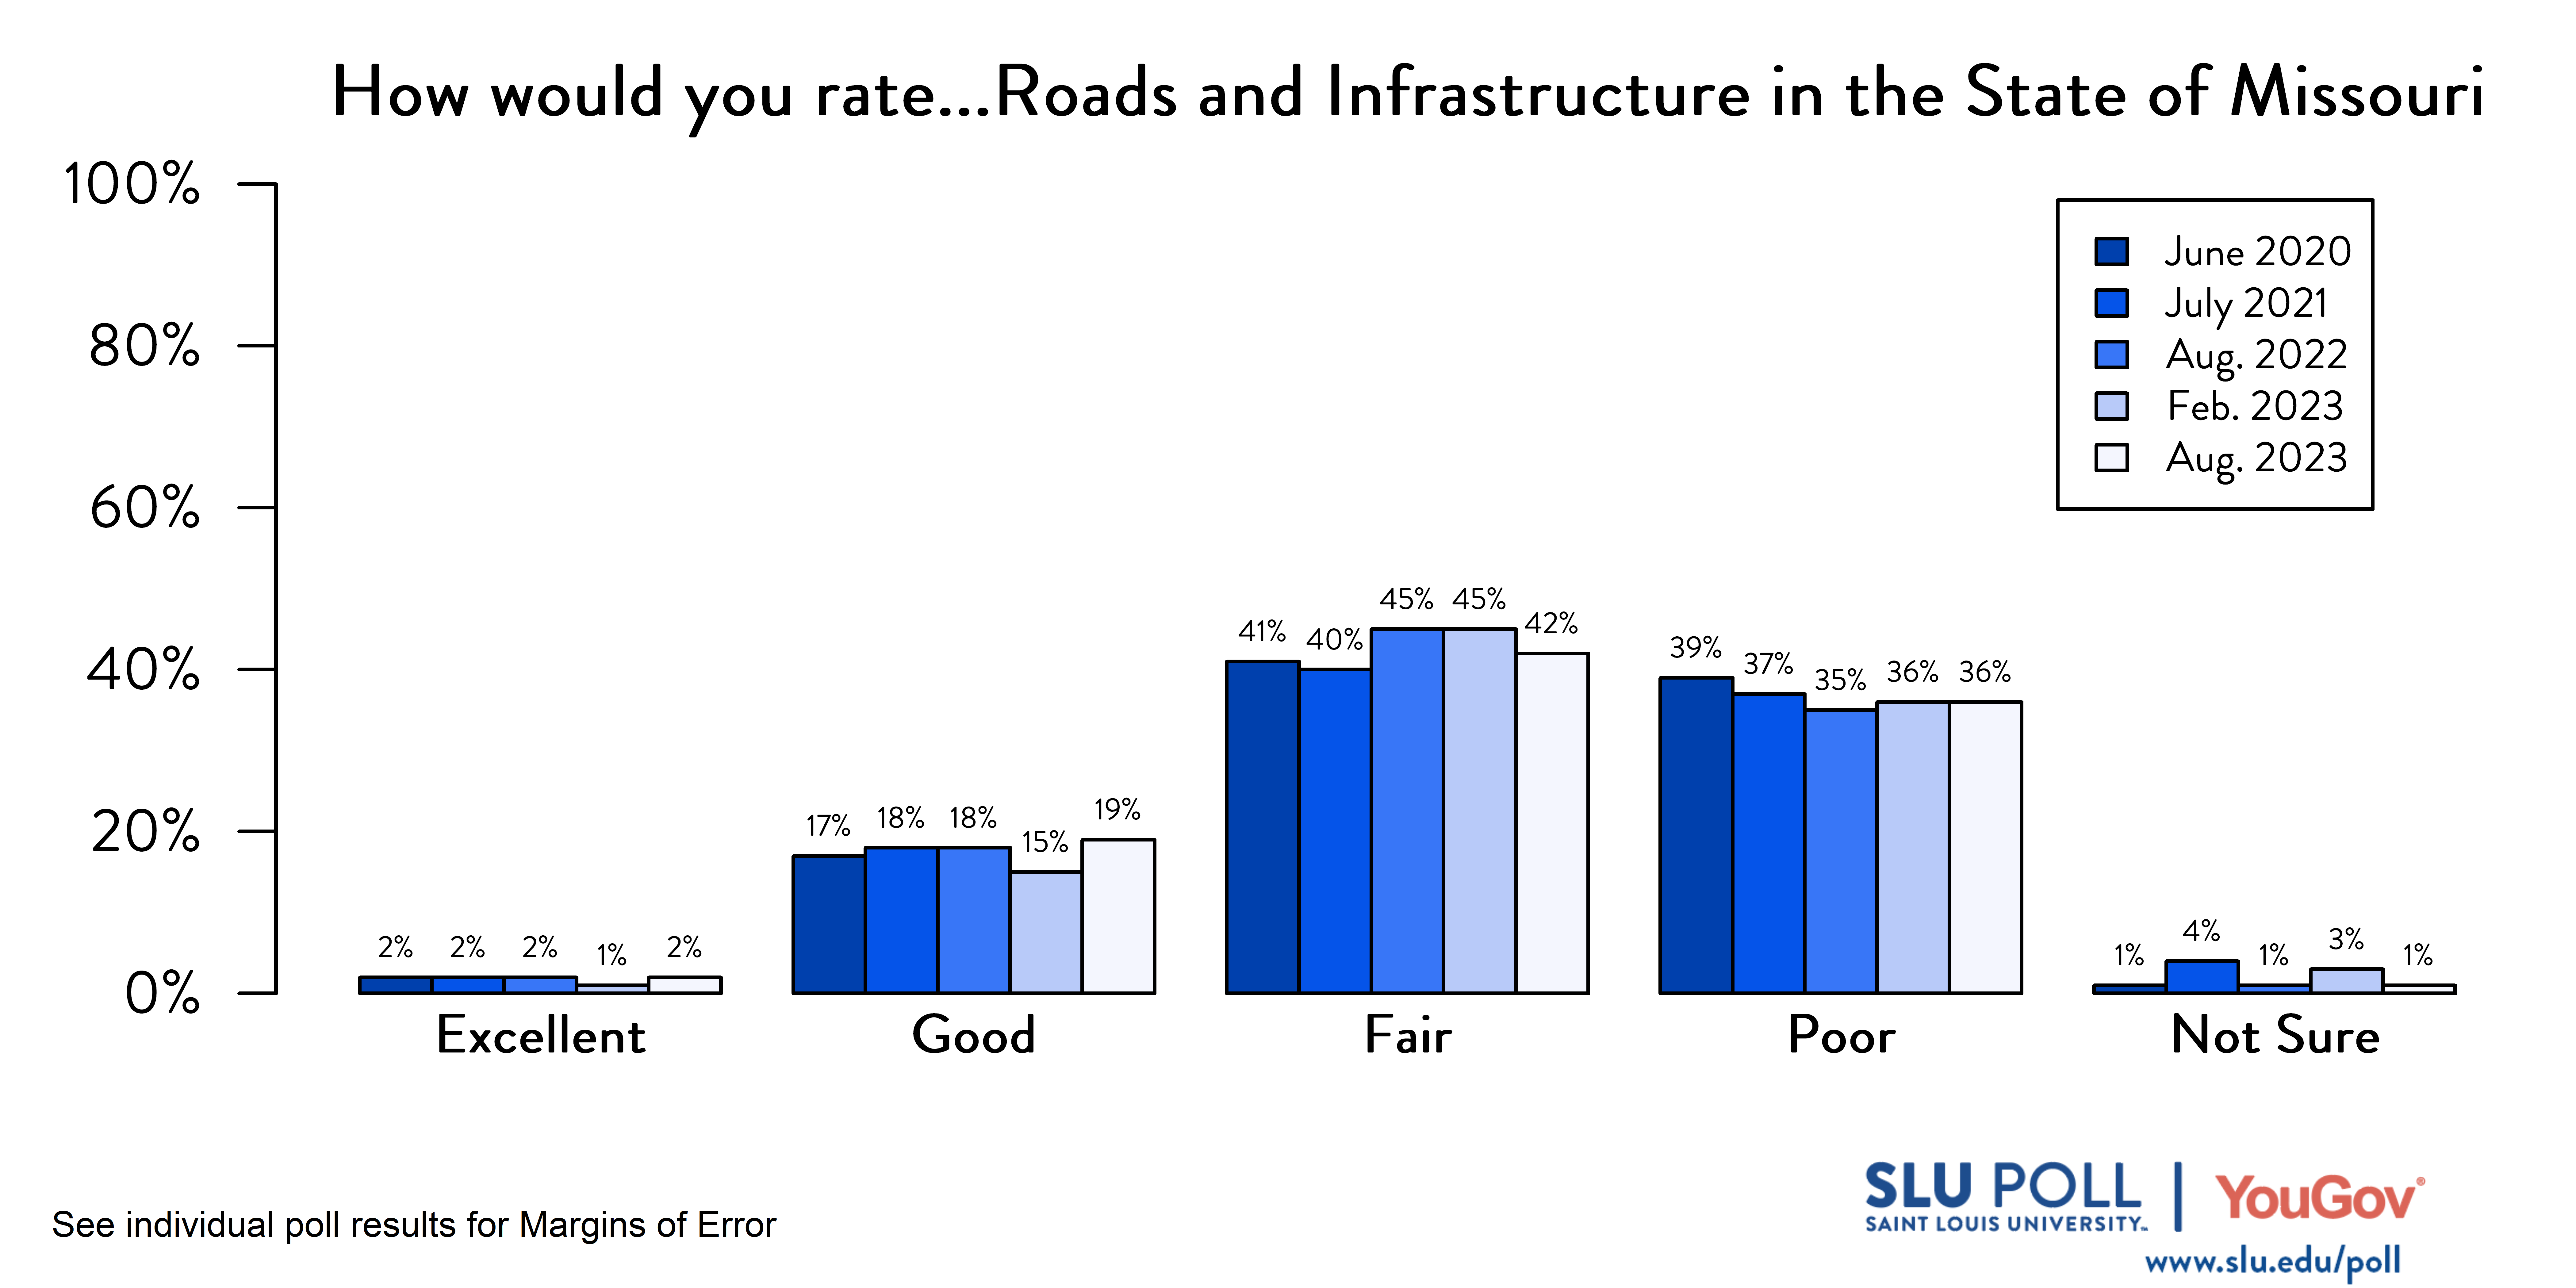 Likely voters' responses to 'How would you rate the condition of the following: Roads and infrastructure in the State of Missouri?'. June 2020 Voter Responses 2% Excellent, 17% Good, 41% Fair, 39% Poor, and 1% Not Sure. July 2021 Voter Responses: 2% Excellent, 18% Good, 40% Fair, 37% Poor, and 4% Not sure. August 2022 Voter Responses: 2% Excellent, 18% Good, 45% Fair, 35% Poor, and 1% Not sure. February 2023 Voter Responses: 1% Excellent, 15% Good, 45% Fair, 36% Poor, and 3% Not sure. August 2023 Voter Responses: 2% Excellent, 19% Good, 42% Fair, 36% Poor, and 1% Not sure.